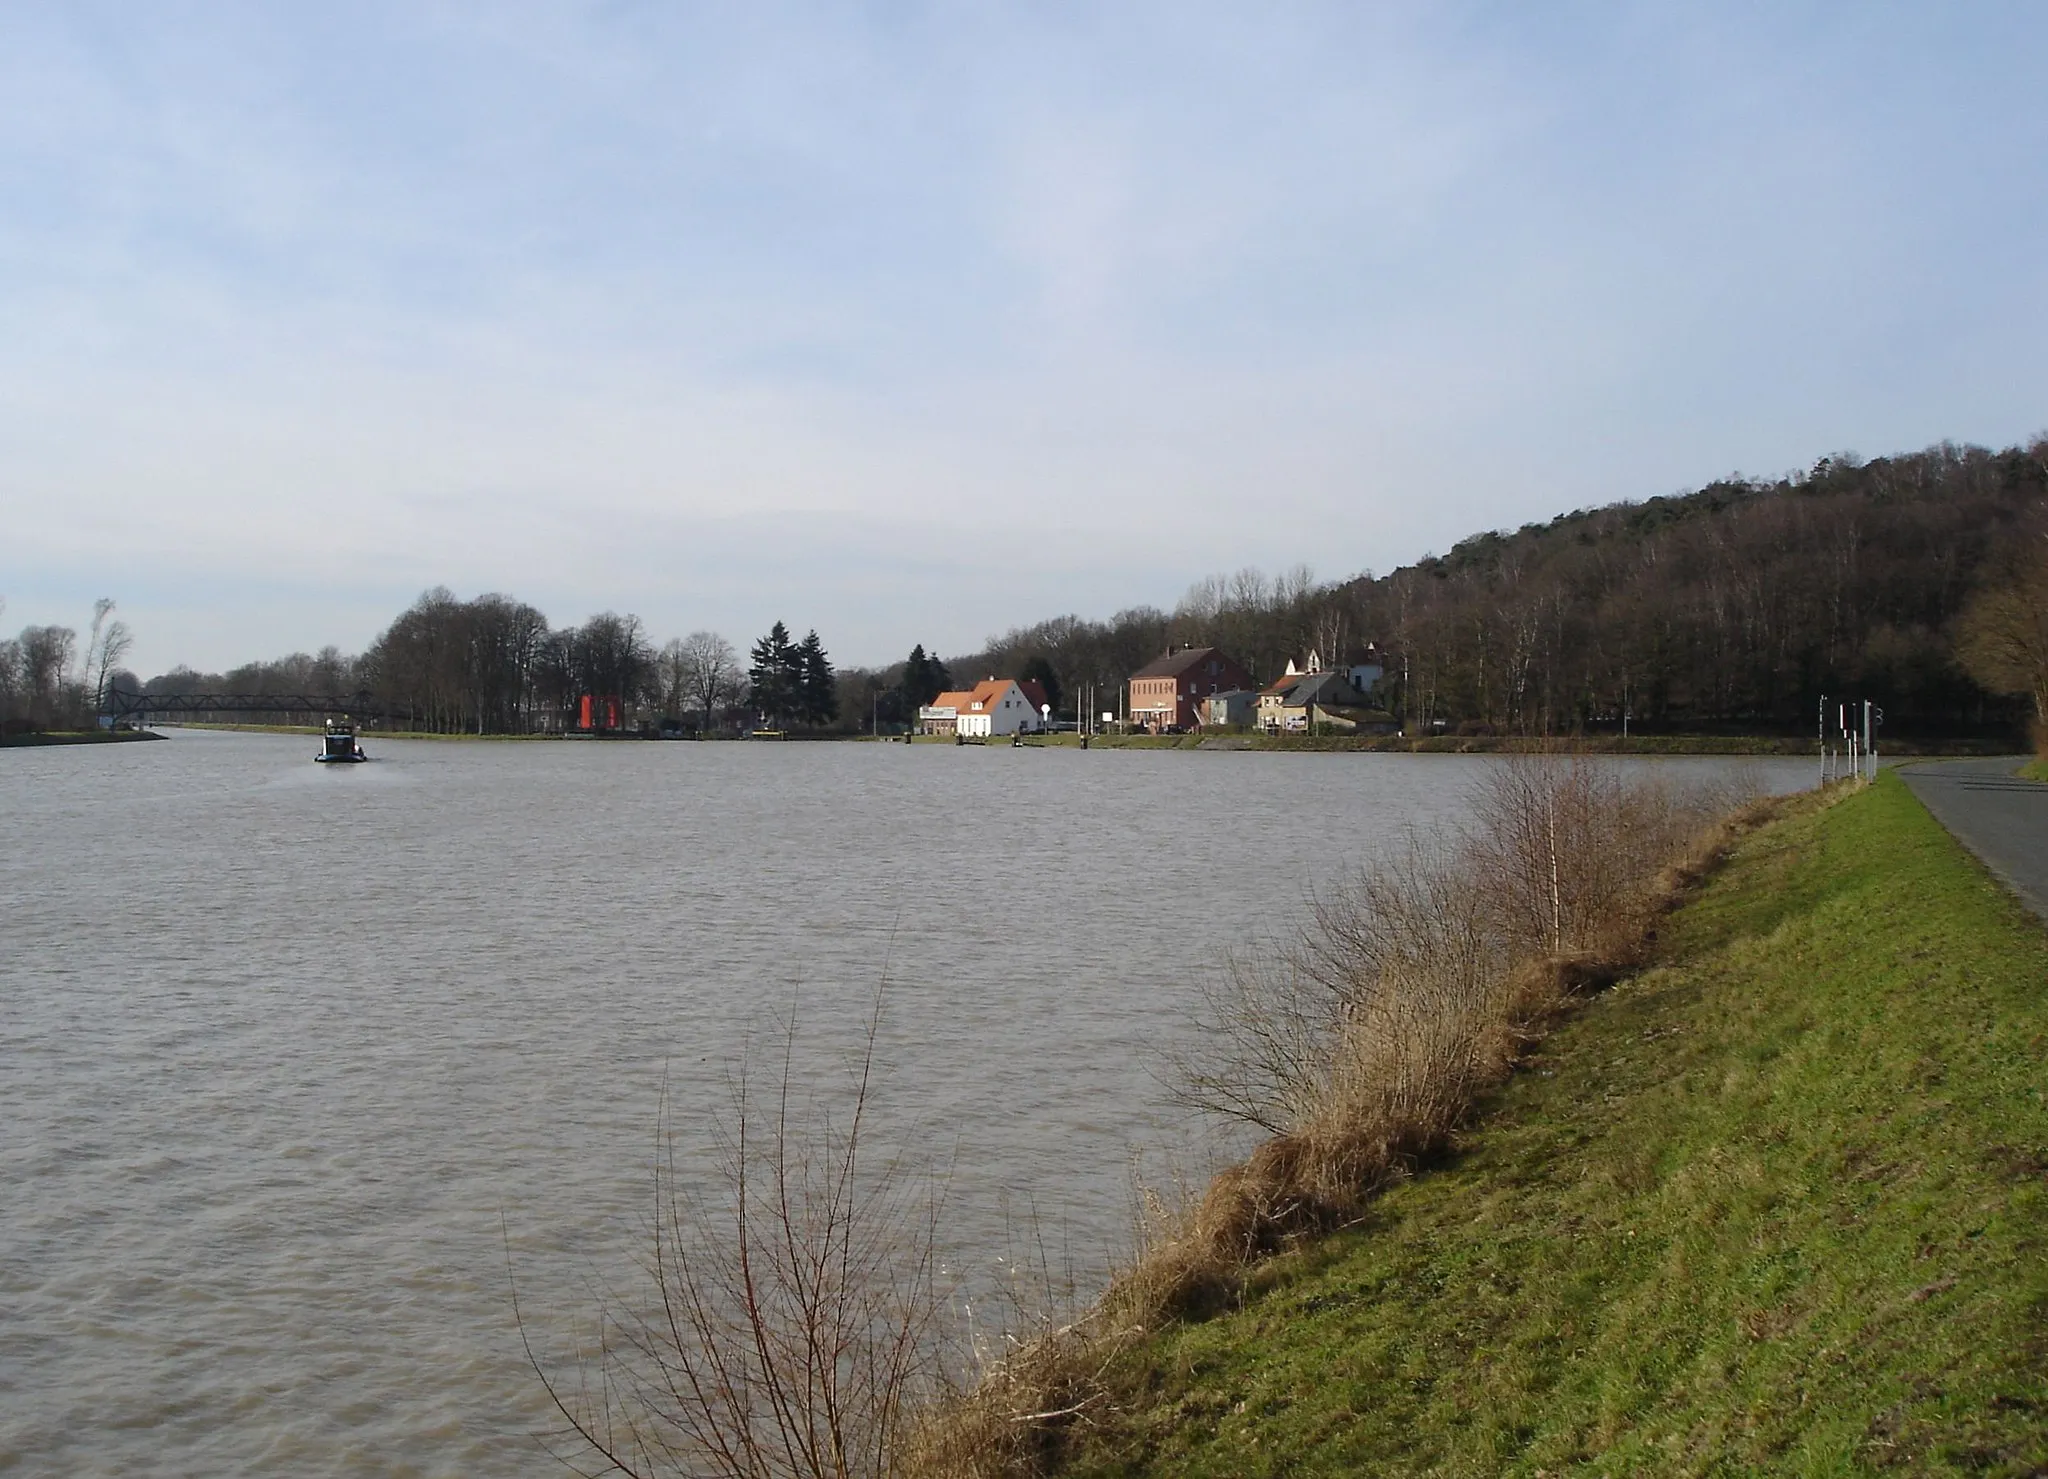 Photo showing: The so called "Nasse Dreieck", Hörstel, Germany. Junction of Dortmund-Ems-Kanal on the left and Mittellandkanal on the right.